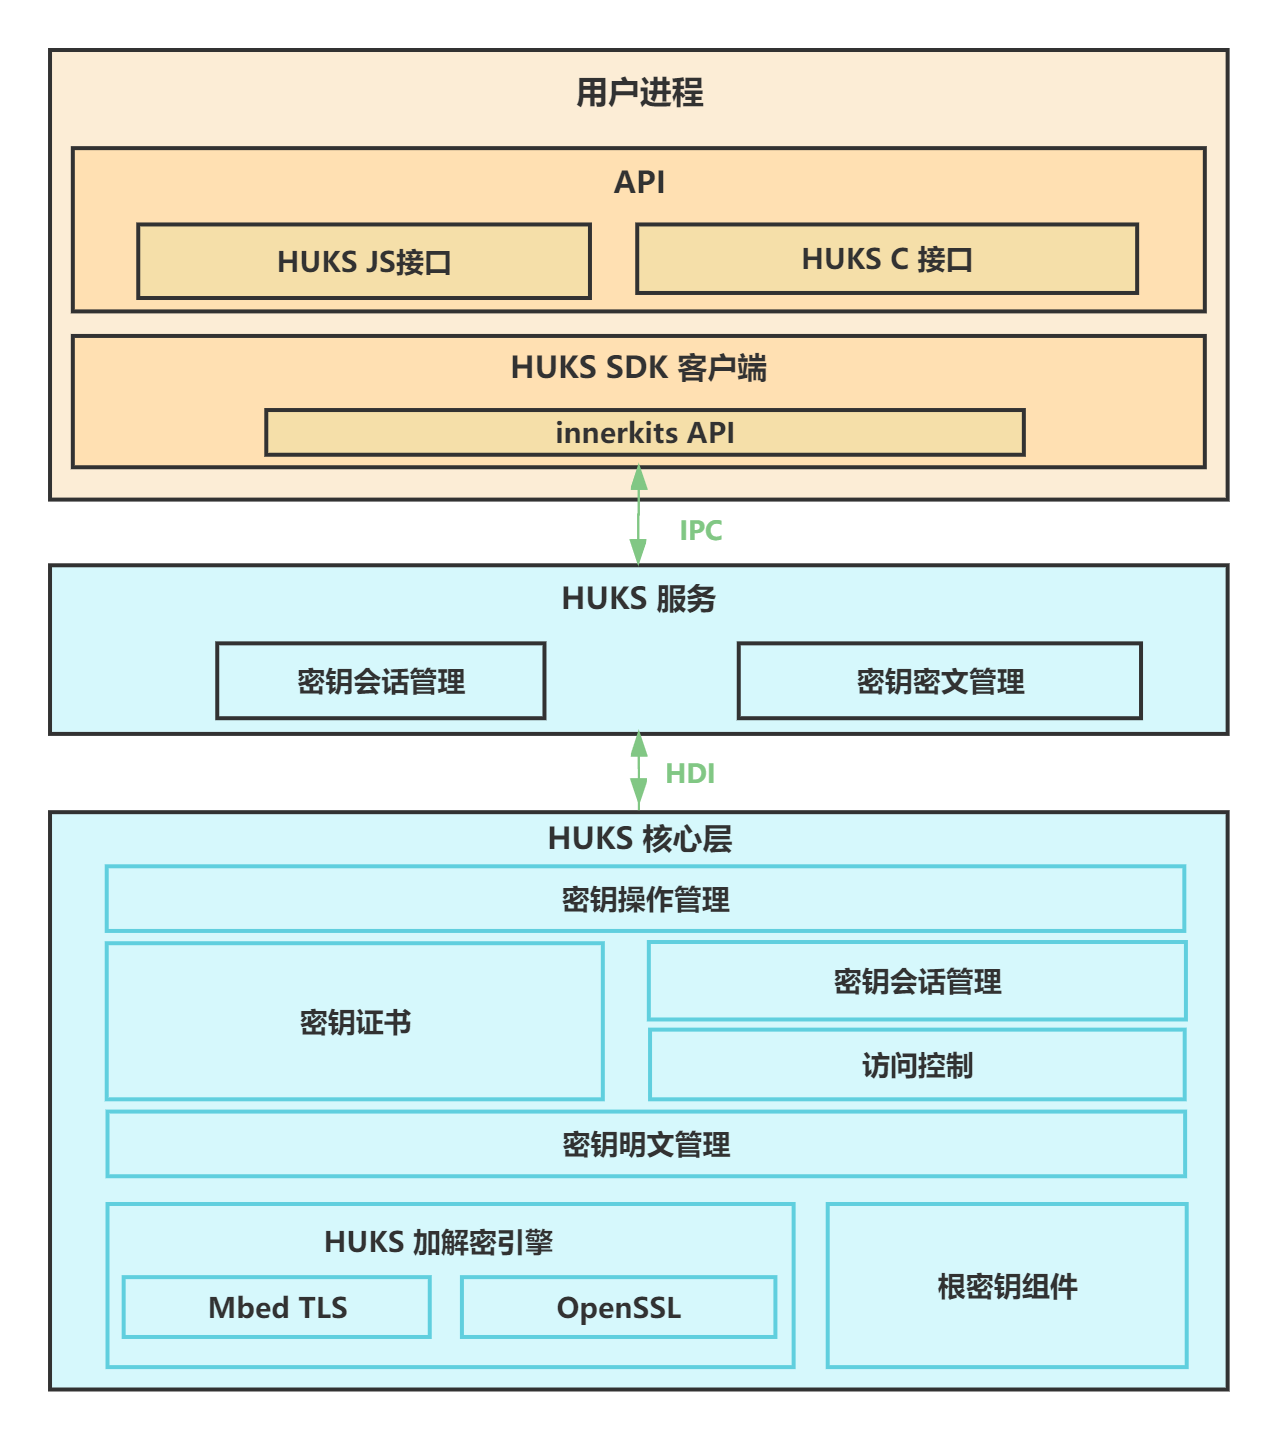 zh-cn/device-dev/subsystems/figures/HUKS-architecture.png